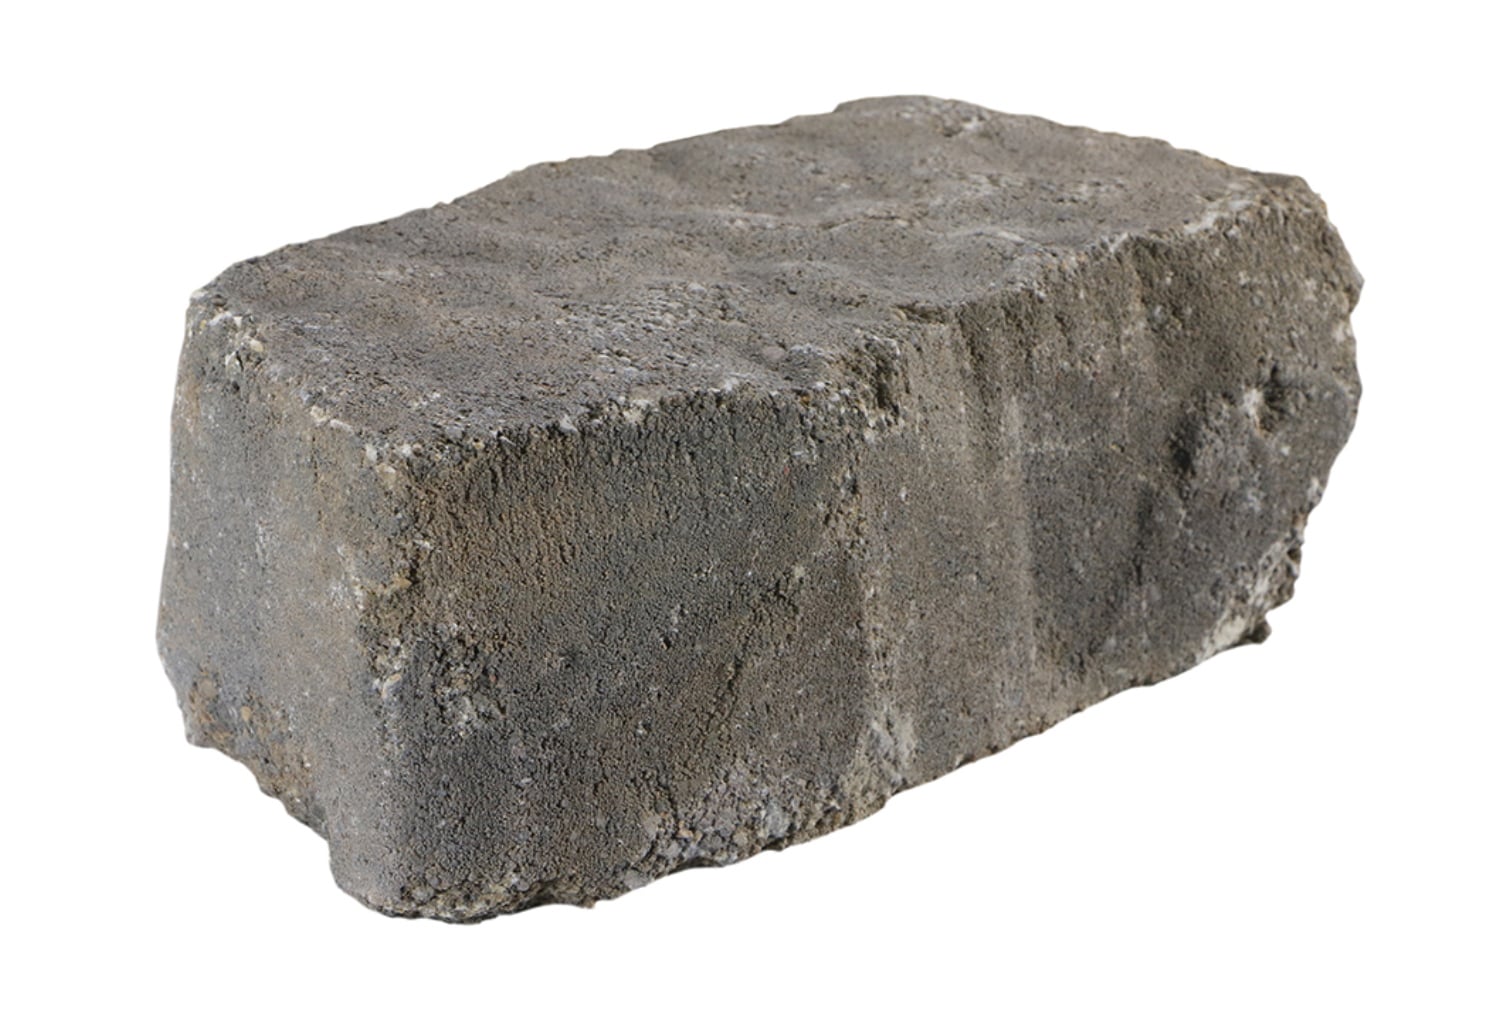 Lowe's Mini Flagstone 8-in L x 3-in H x 4-in D Chandler Blend Retaining Wall Block in Brown | 309709